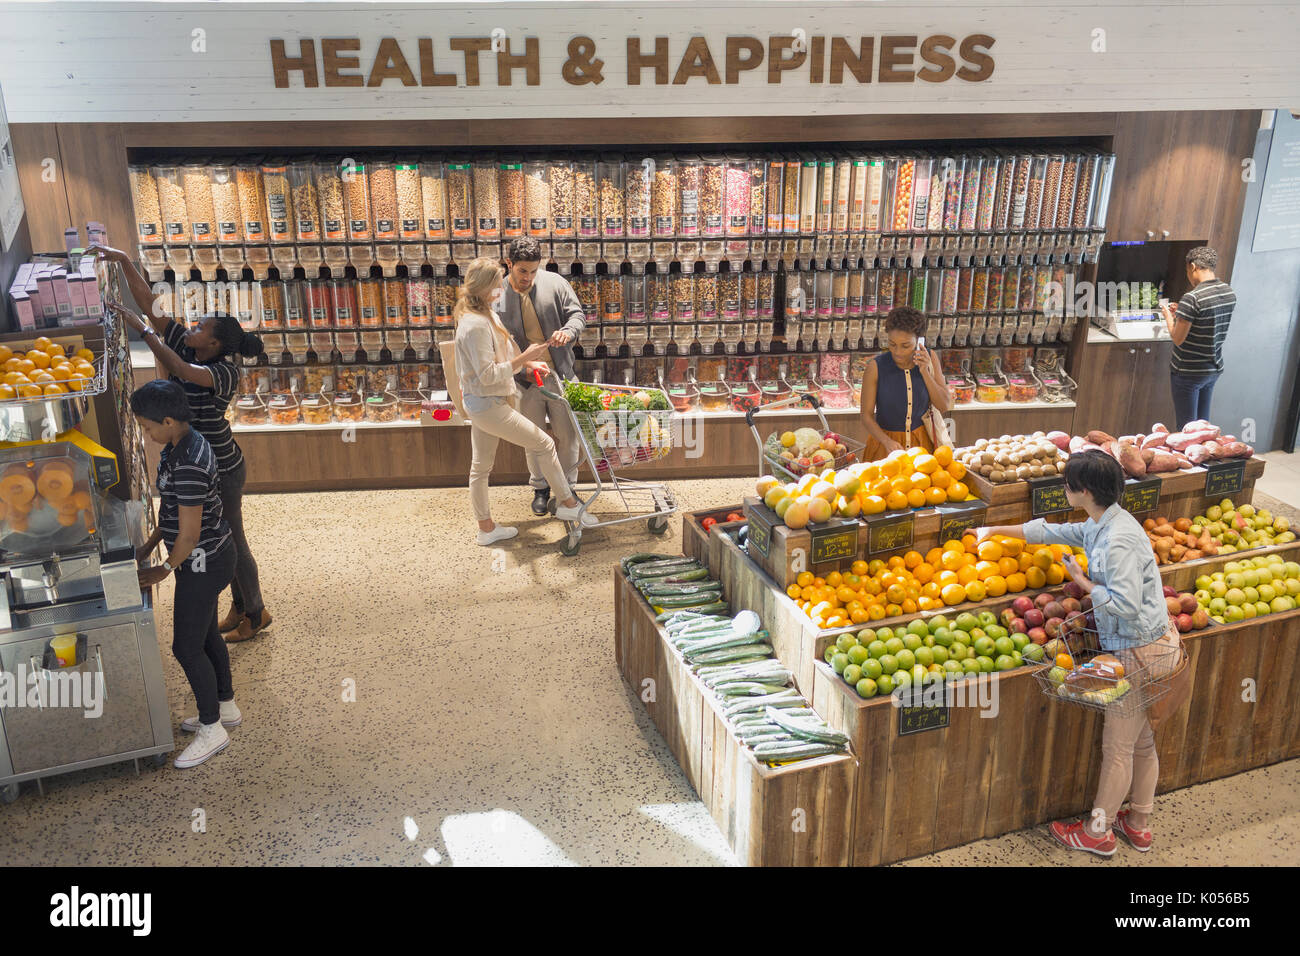 View of people grocery shopping in health food store Stock Photo